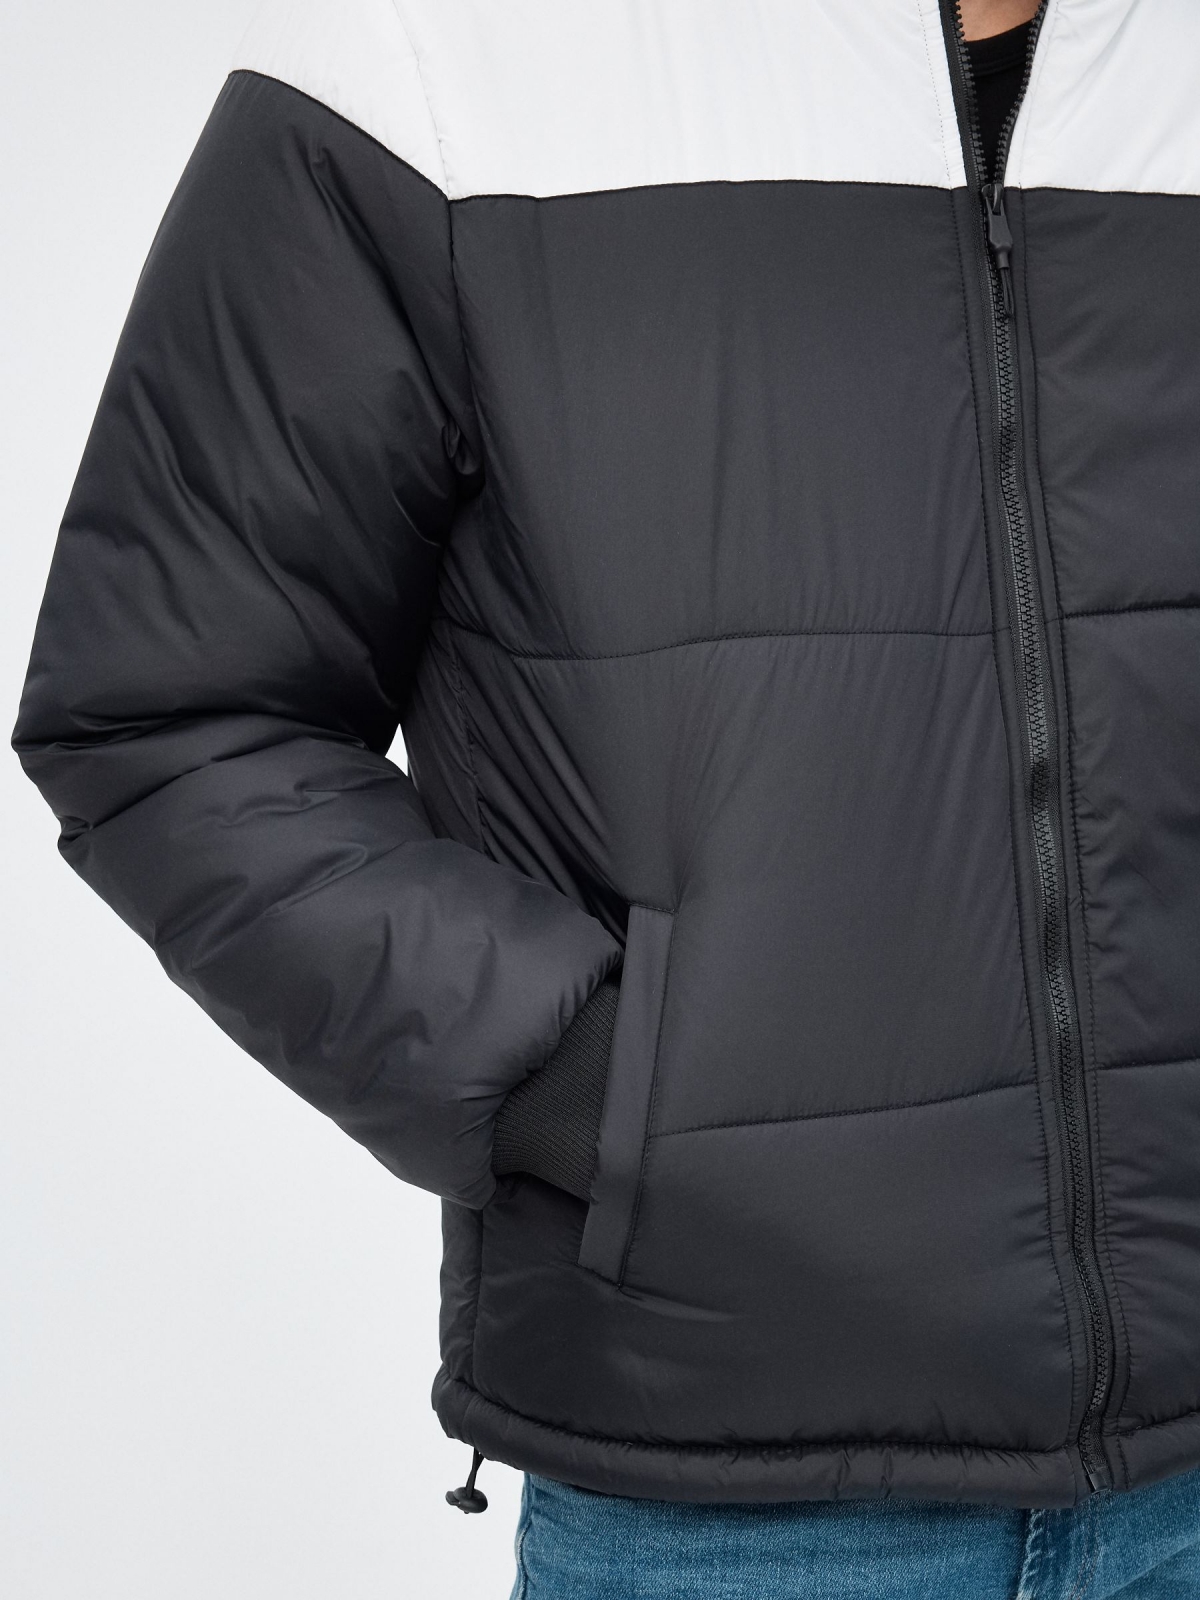 Block color quilted jacket black detail view